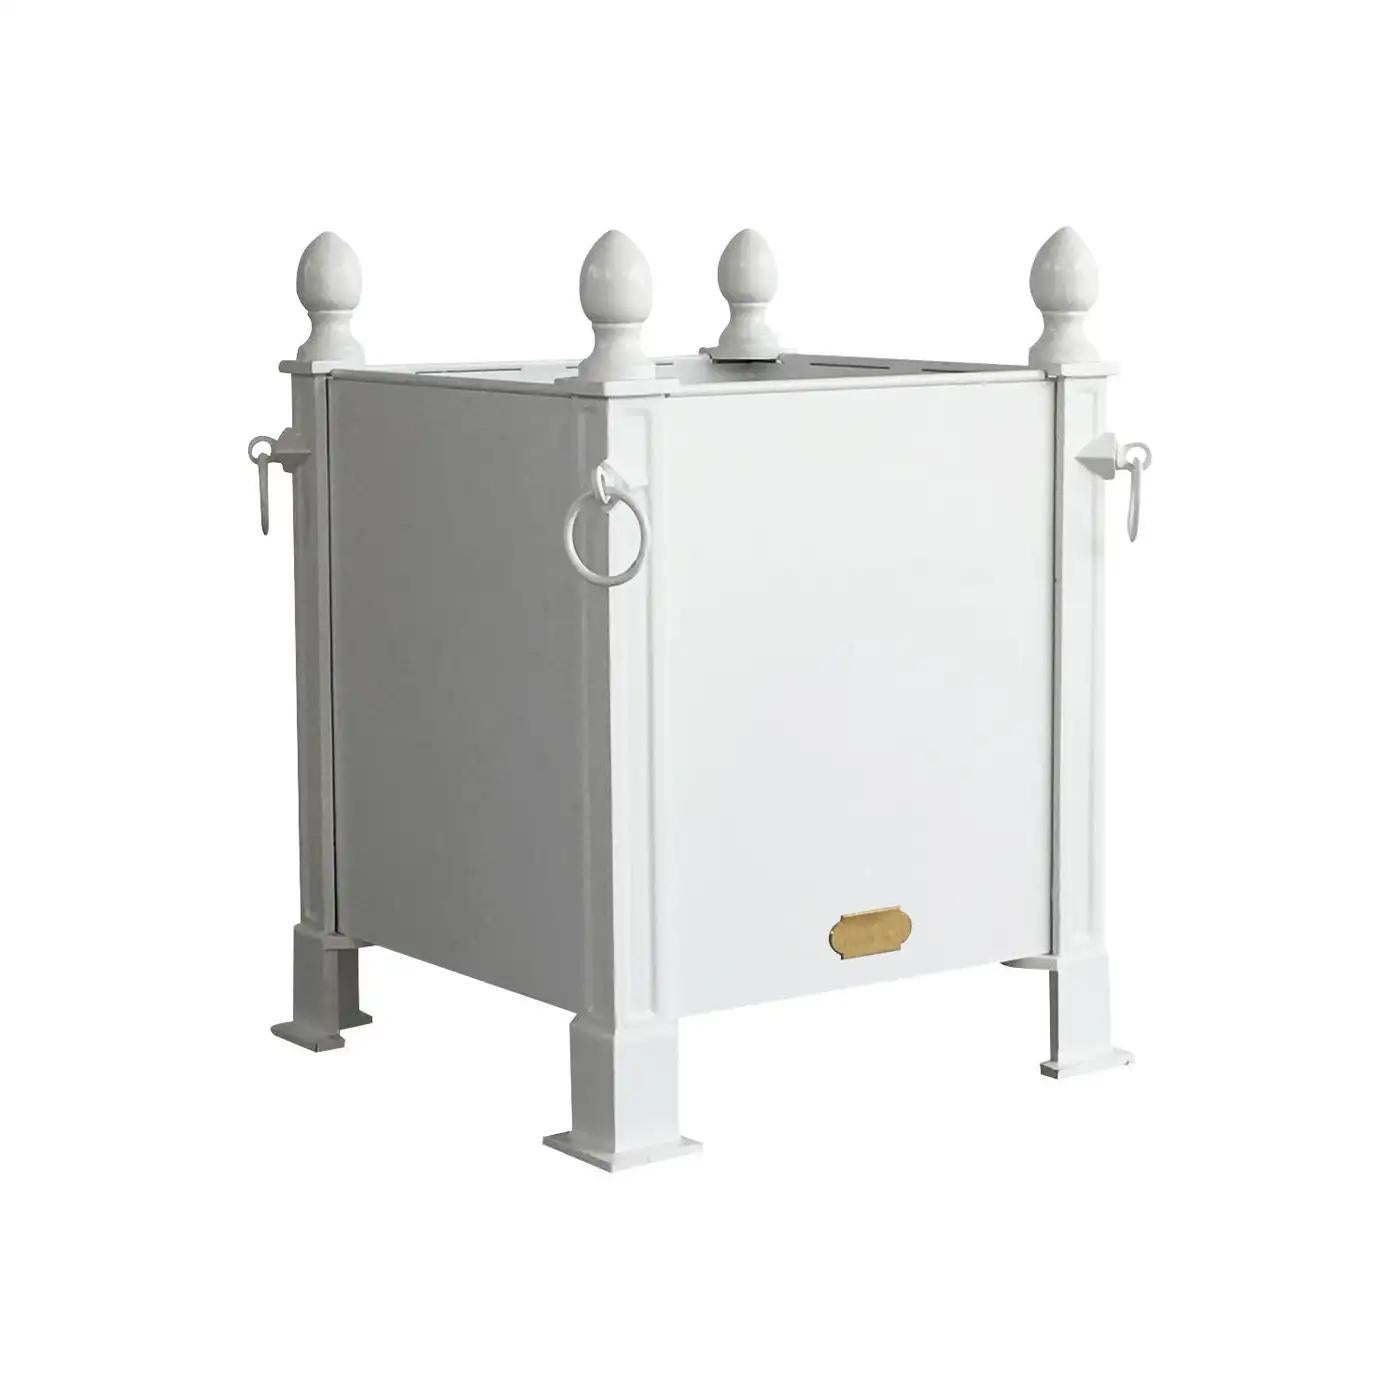 Fashionable in Paris during the 18th and 19th Centuries, this style of French planter box was often used to flank grand entrances with citrus trees or topiaries.   

Benjamin Moore Color: White